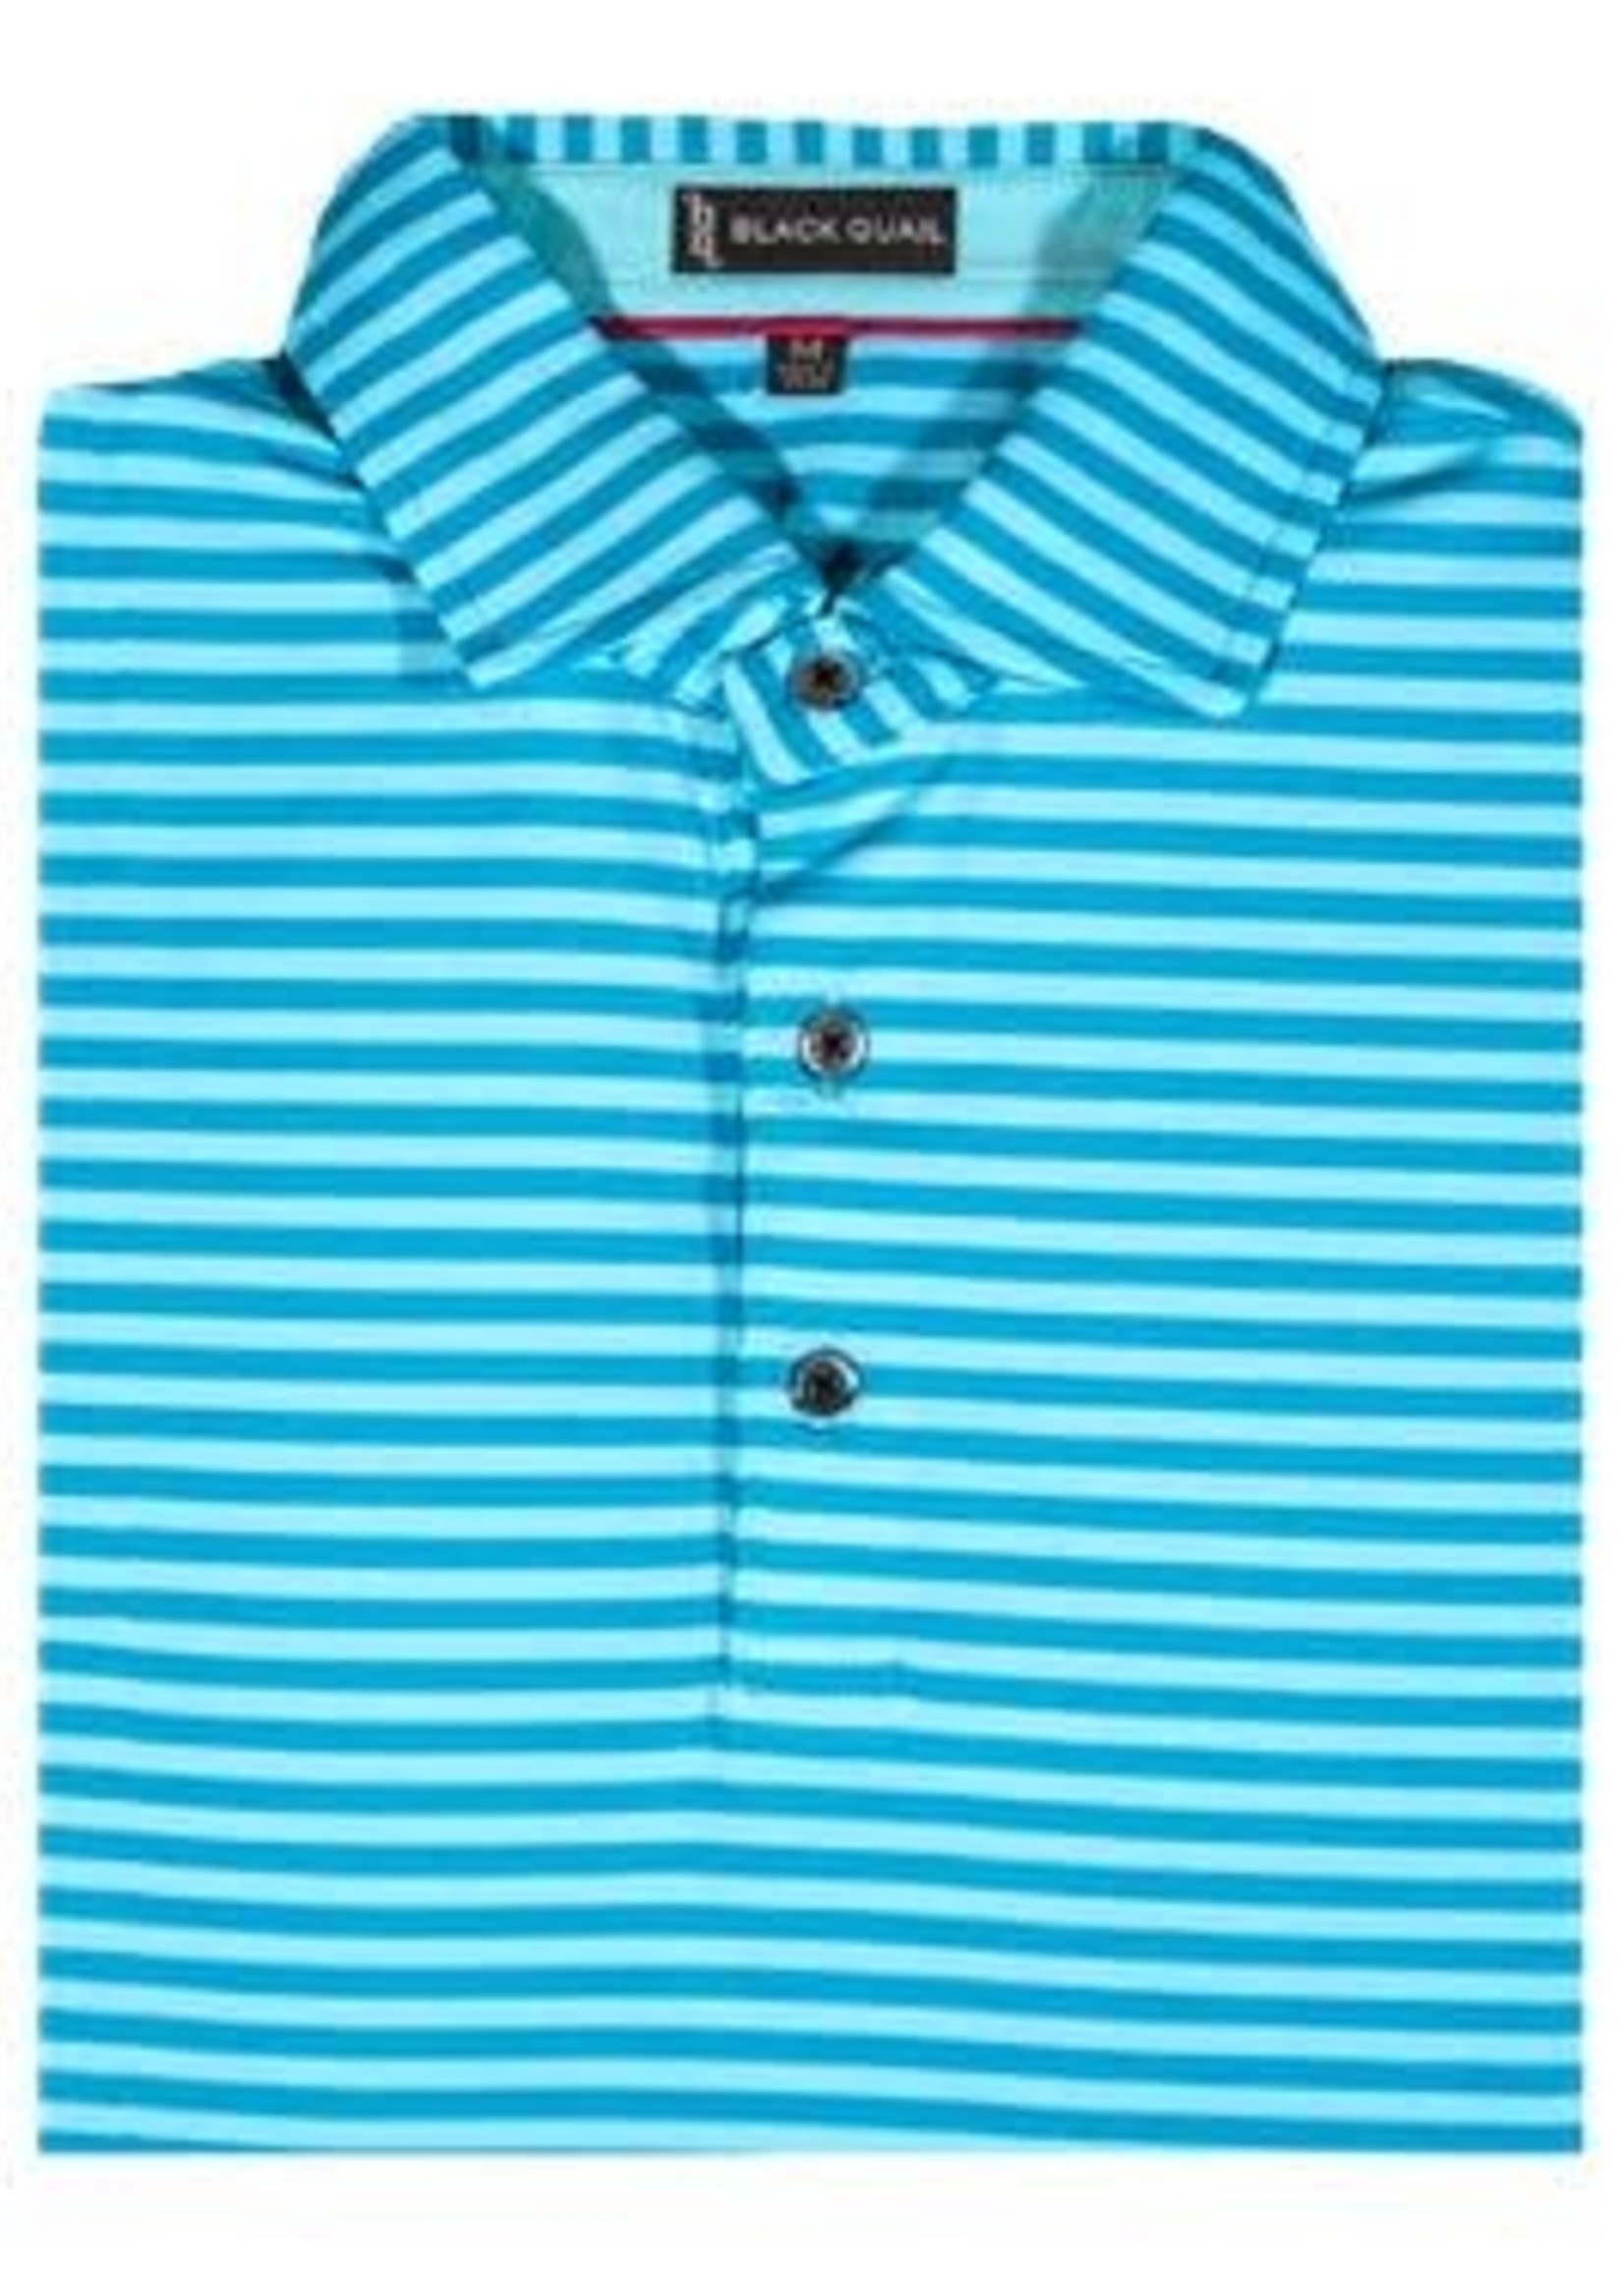 Reeves Men's Polo Shirt